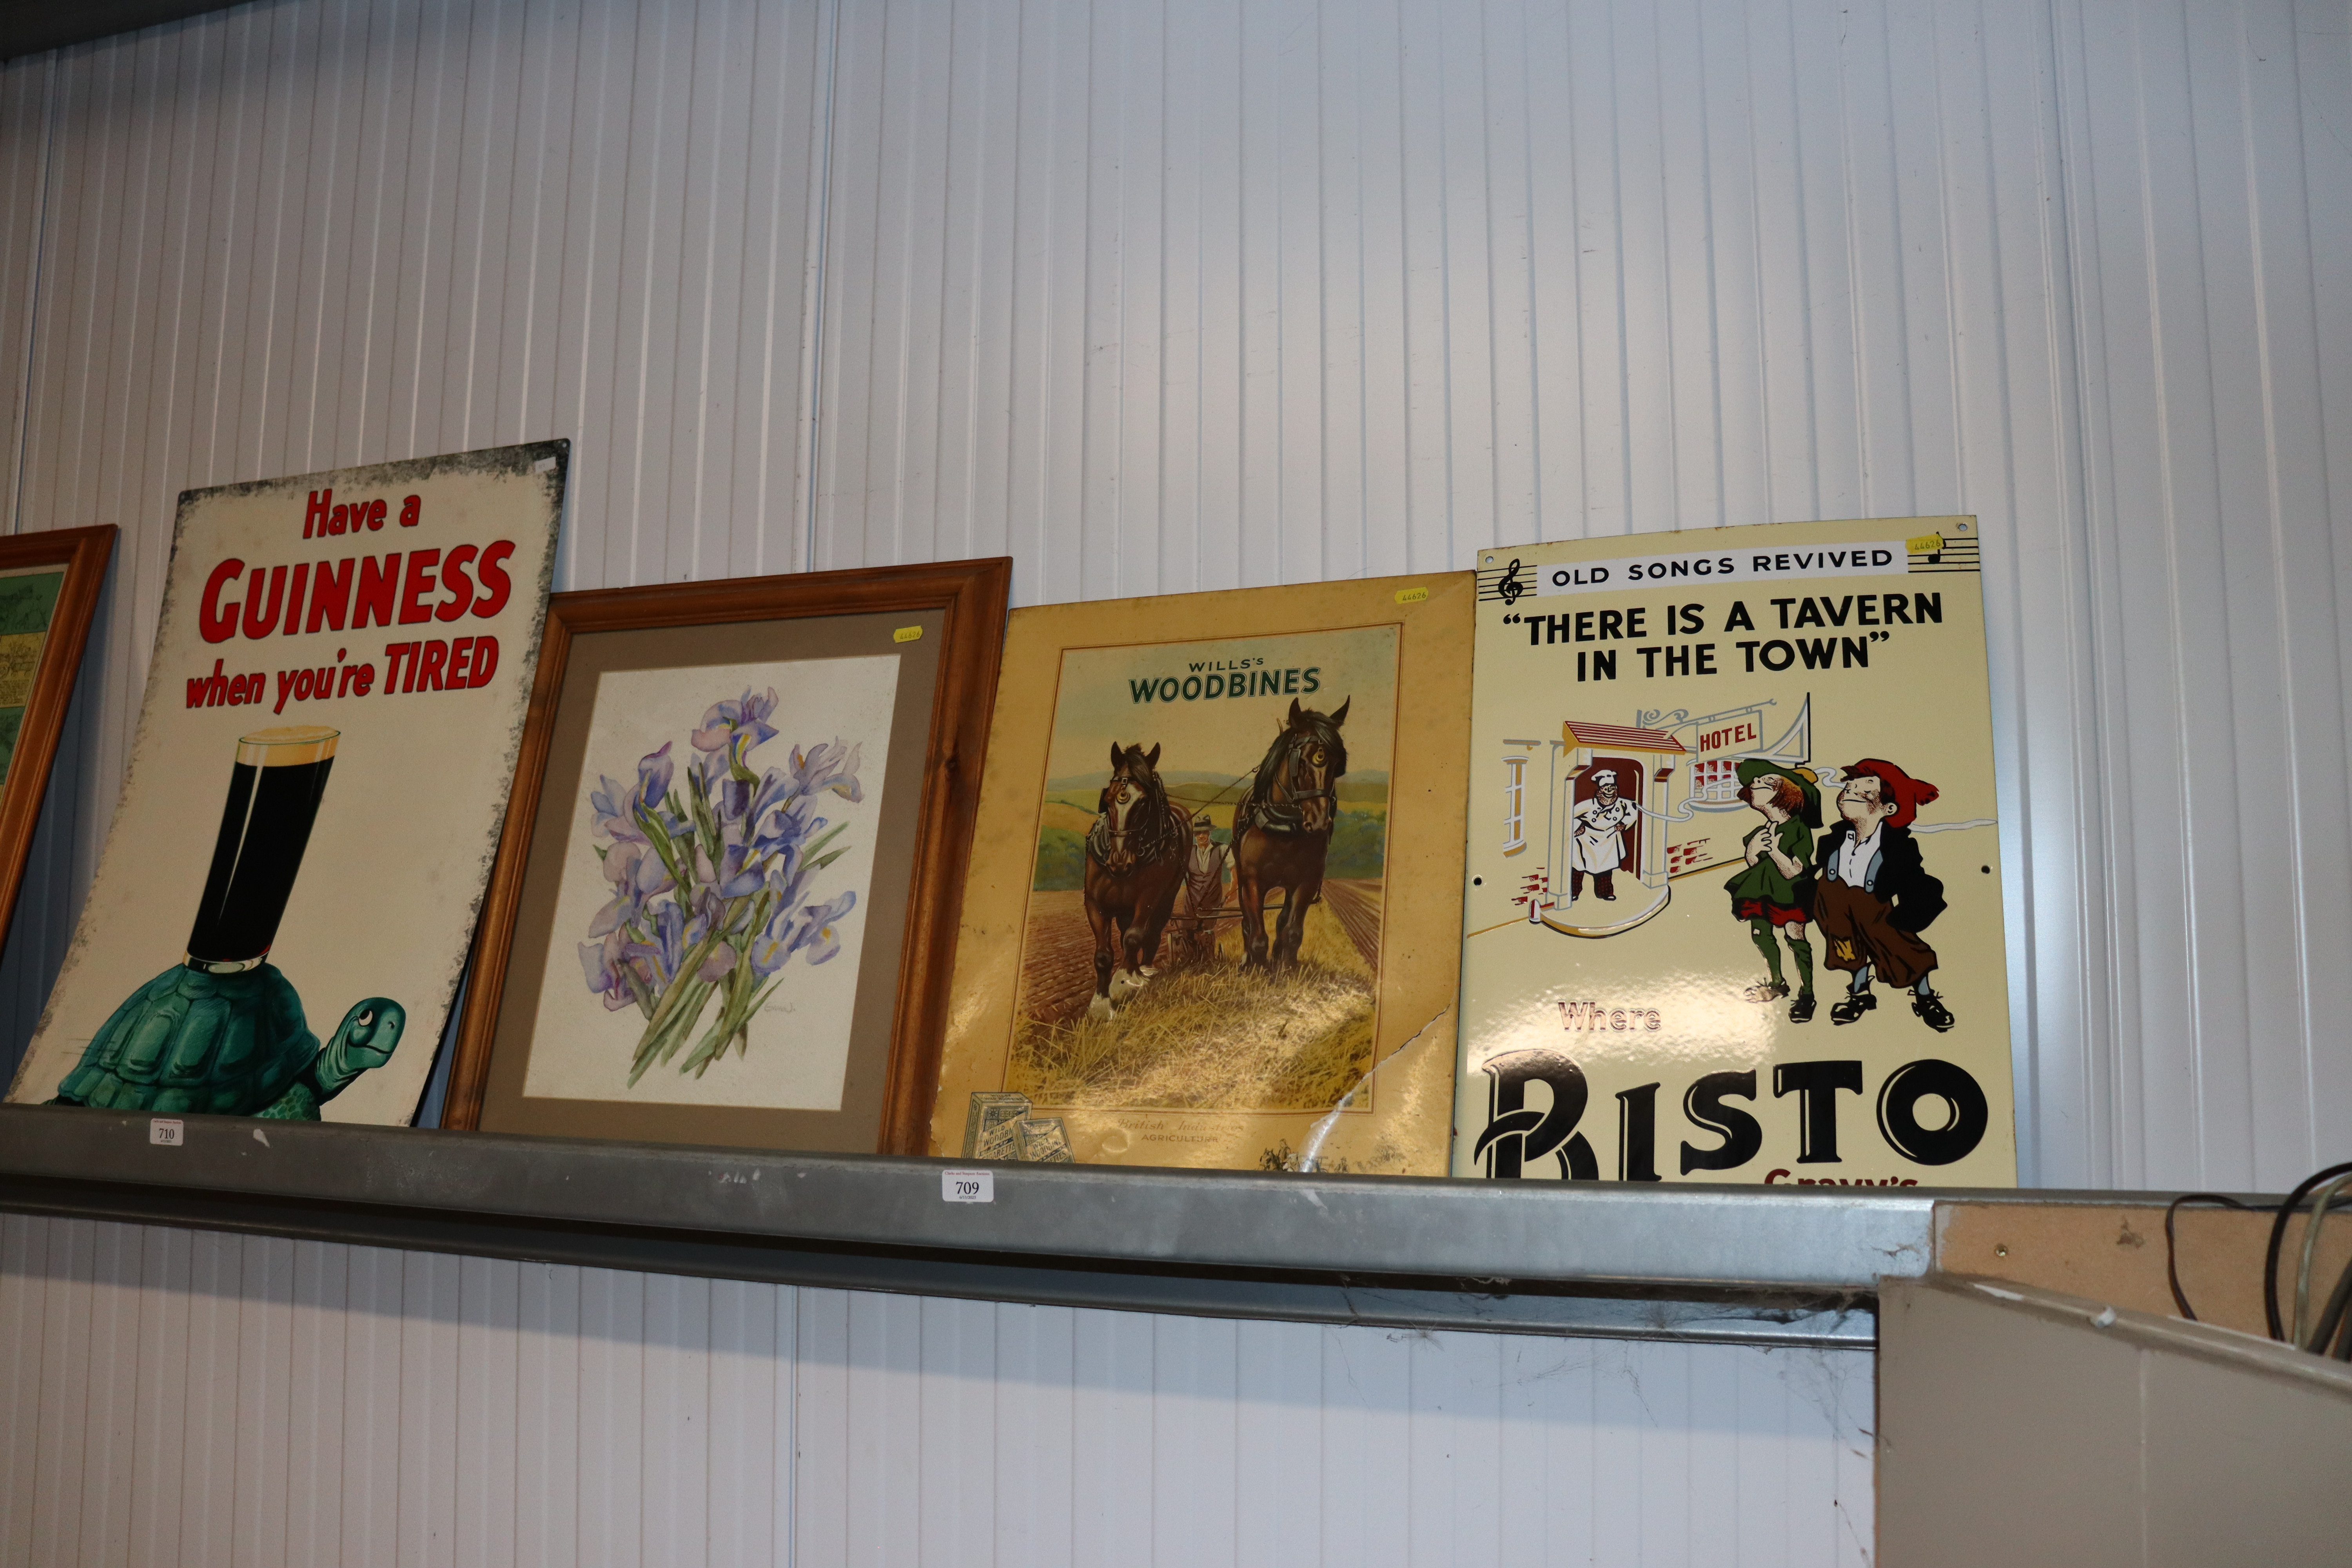 A "Bisto" advertising sign together with a "Wills Woodbines" advertising sign and a still life study